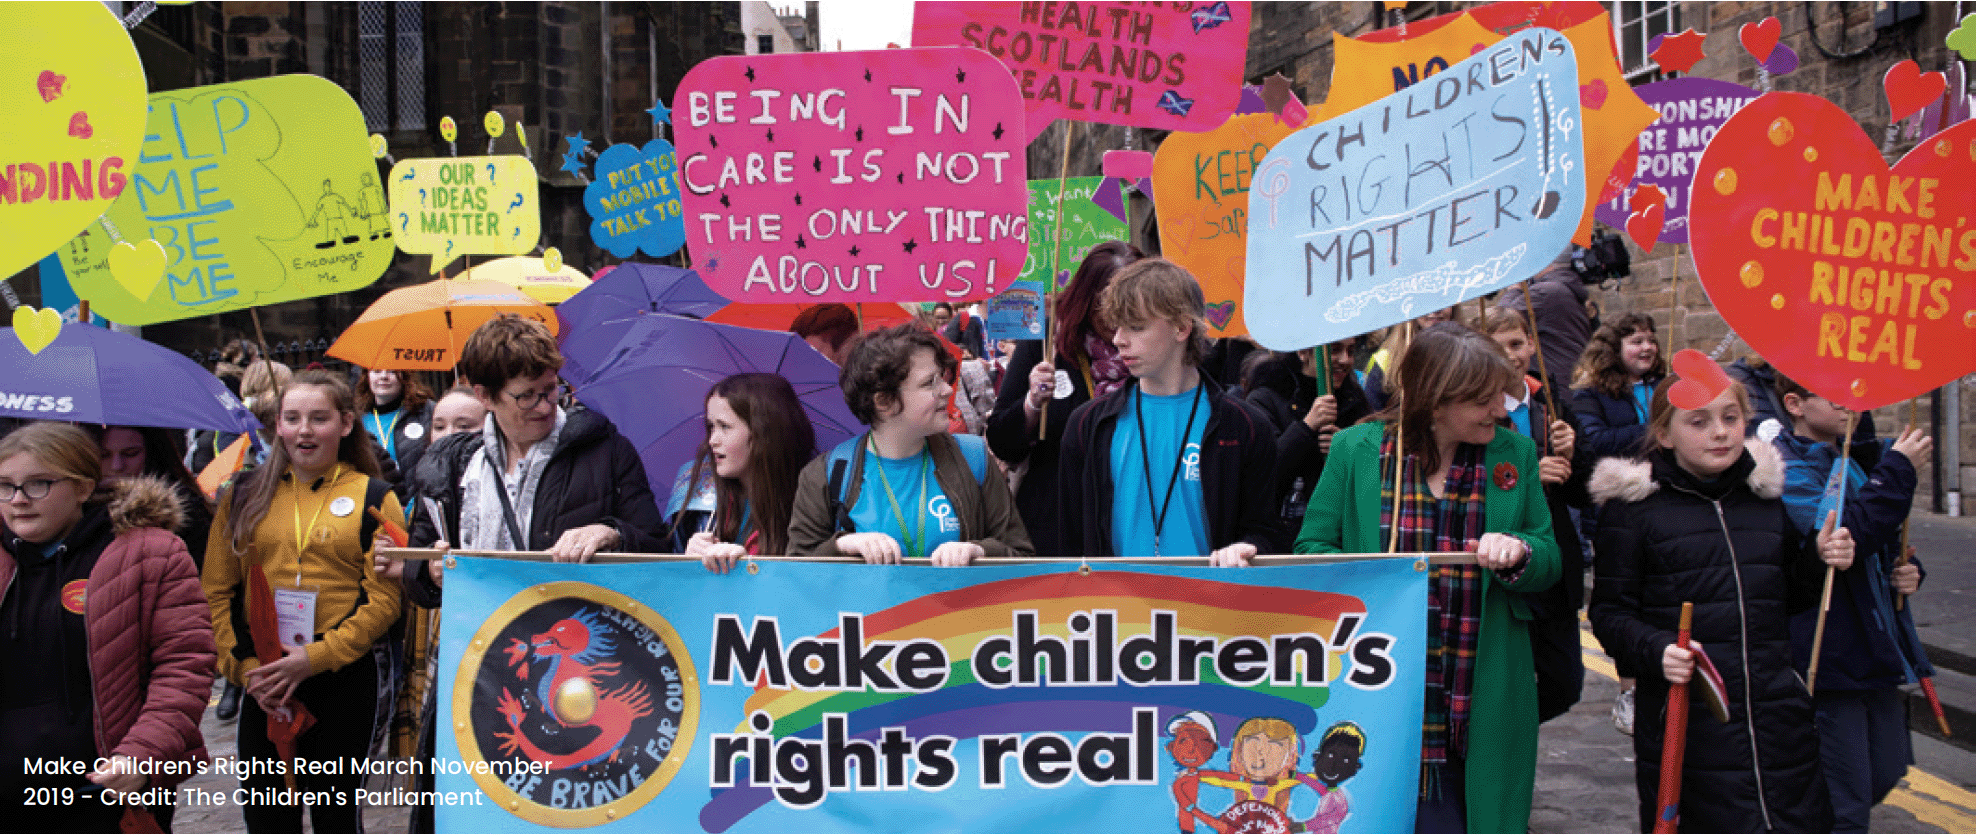 A photo of young people displaying placards at an event in the Royal Mile, Edinburgh.